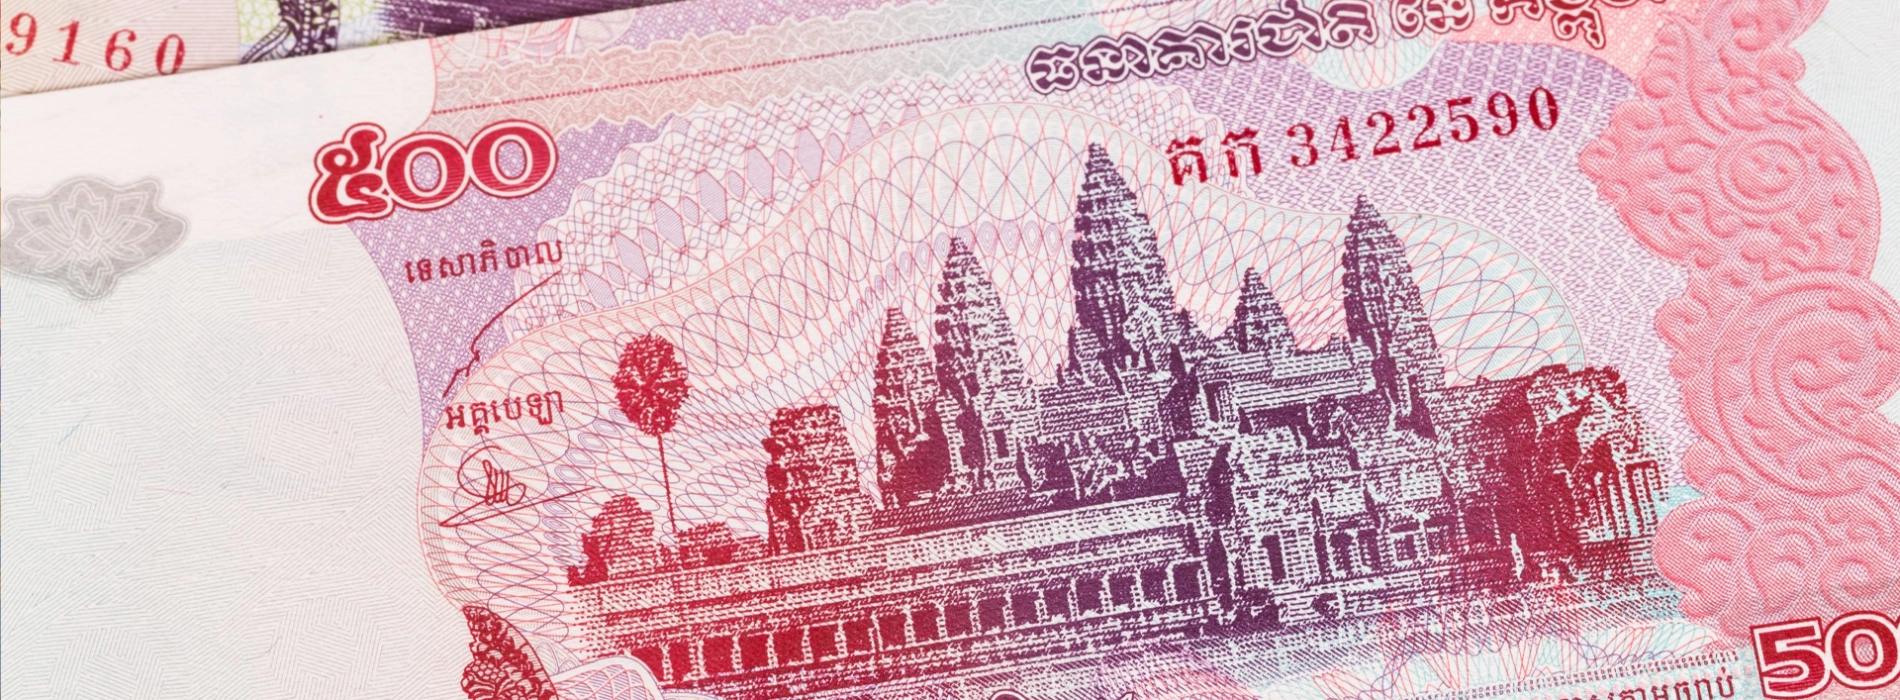 Cambodian currency: Everything you need to know